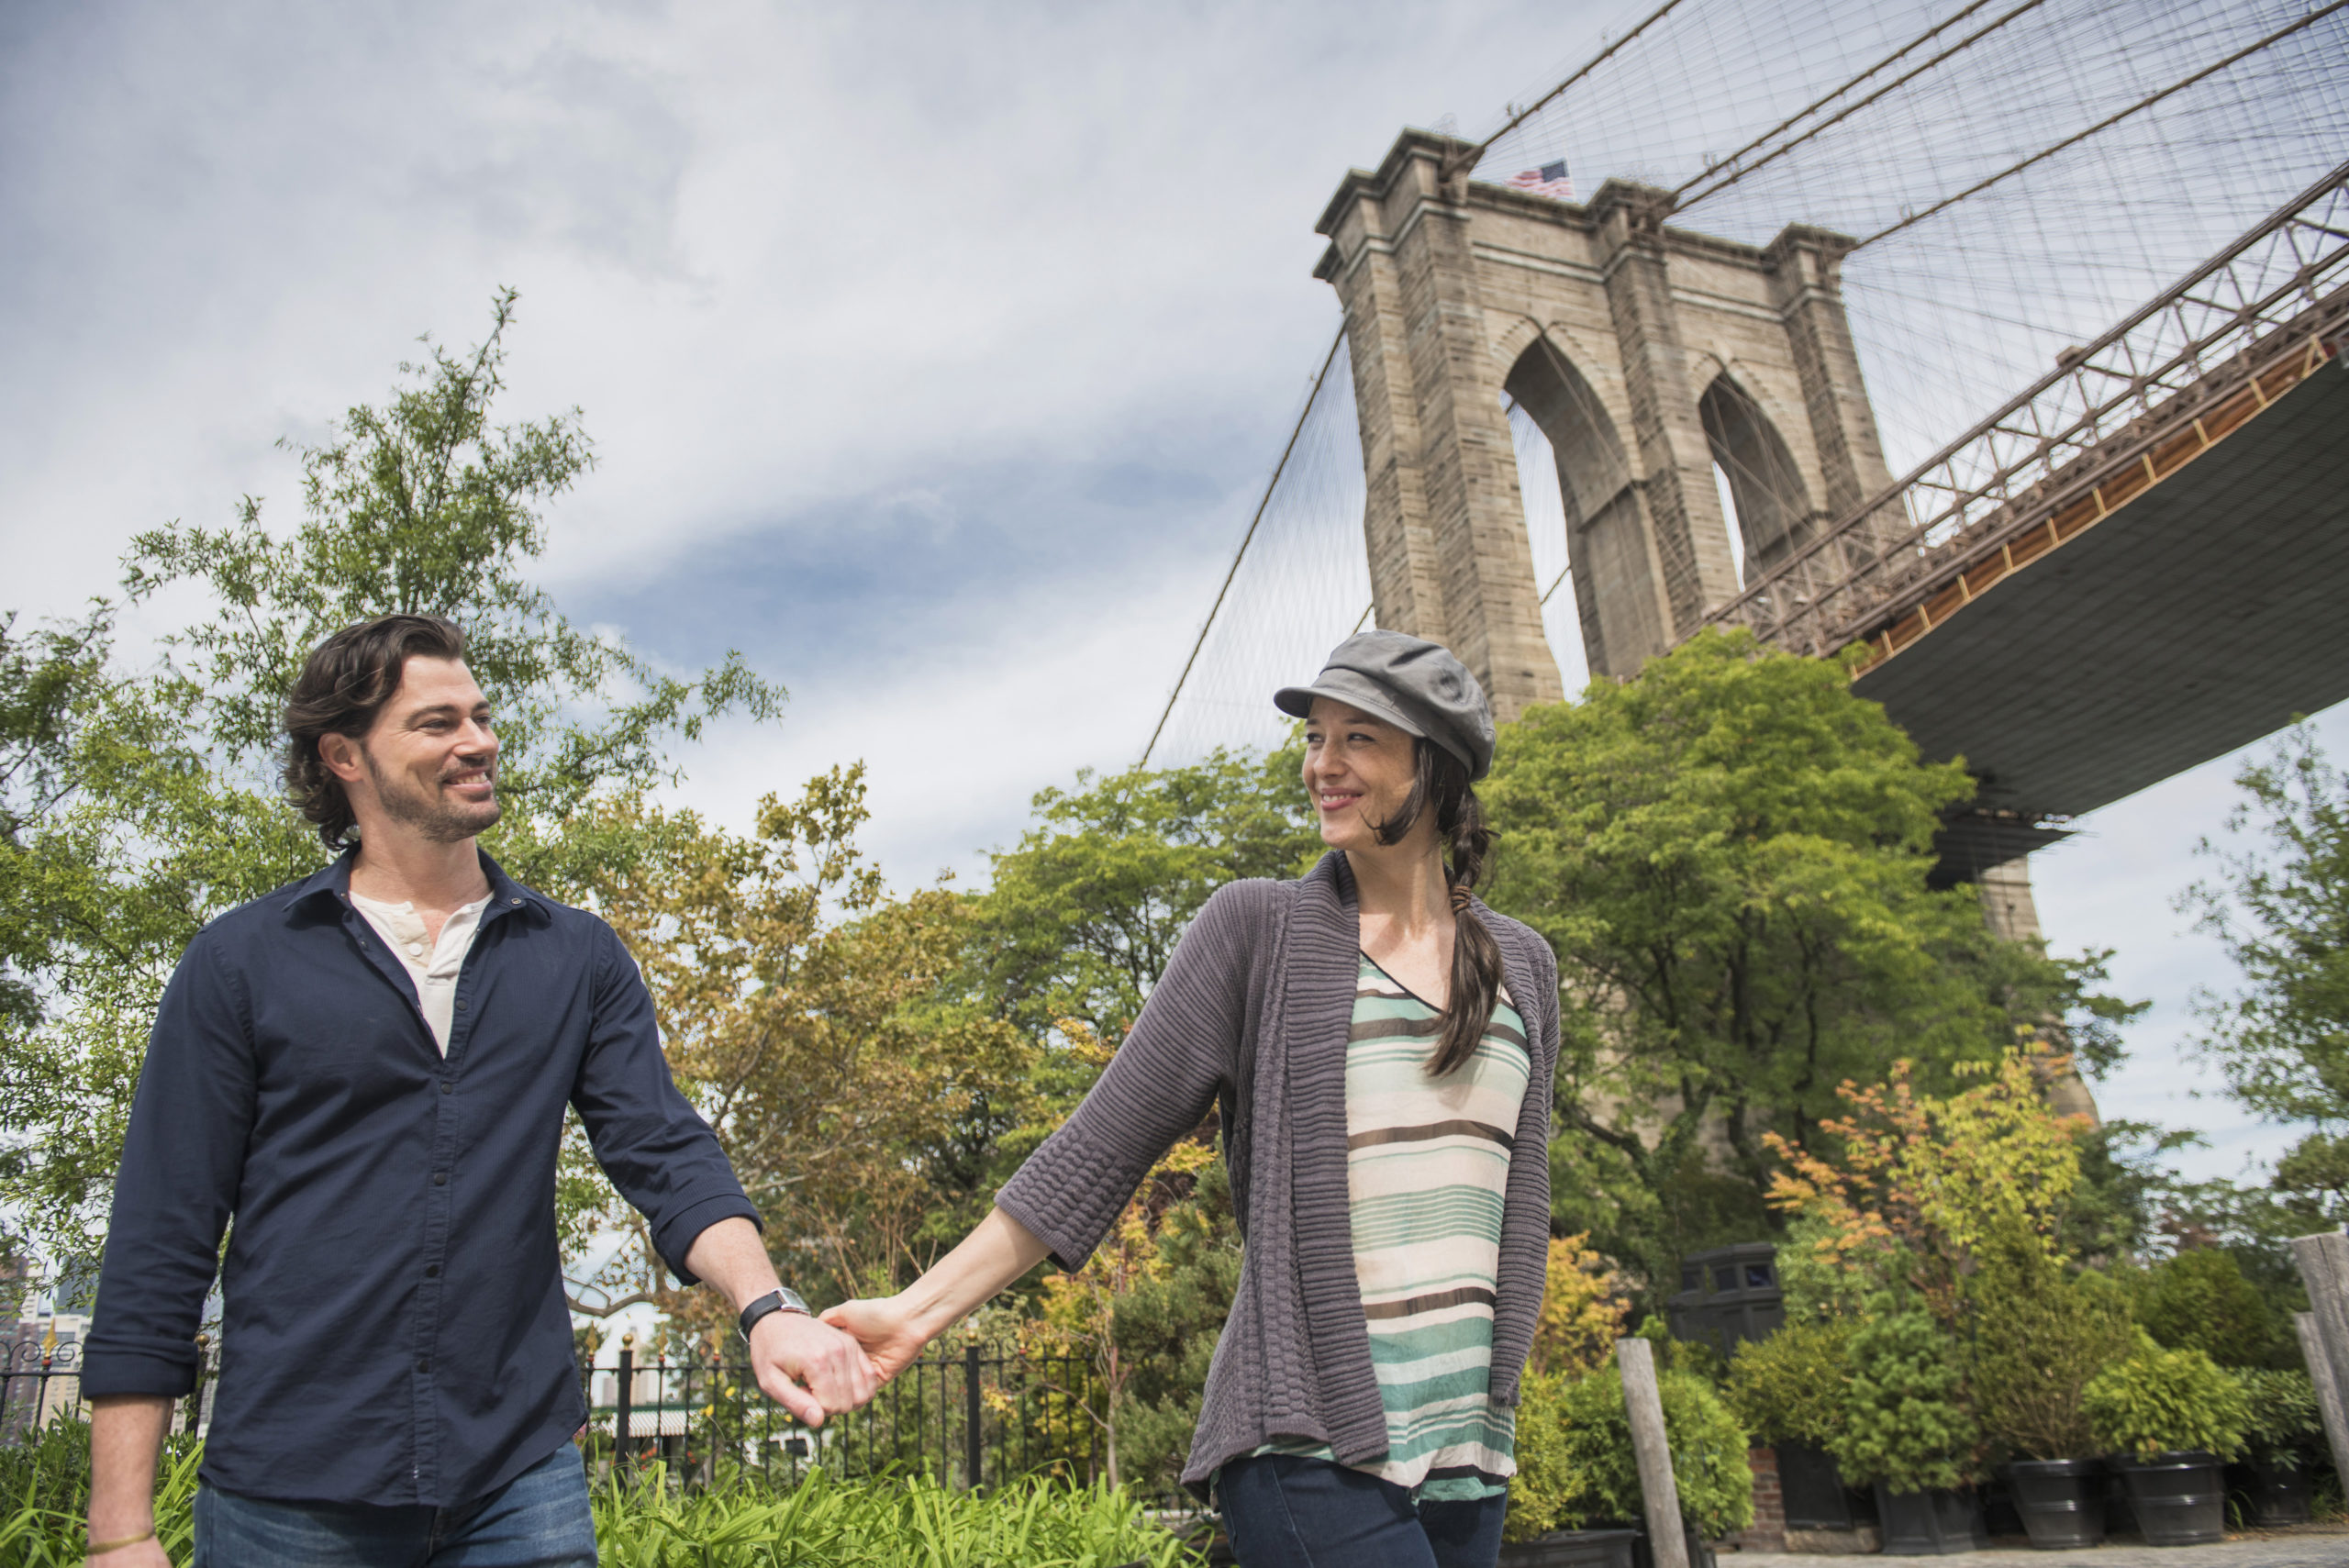 20 Of The Best Date Ideas In NYC